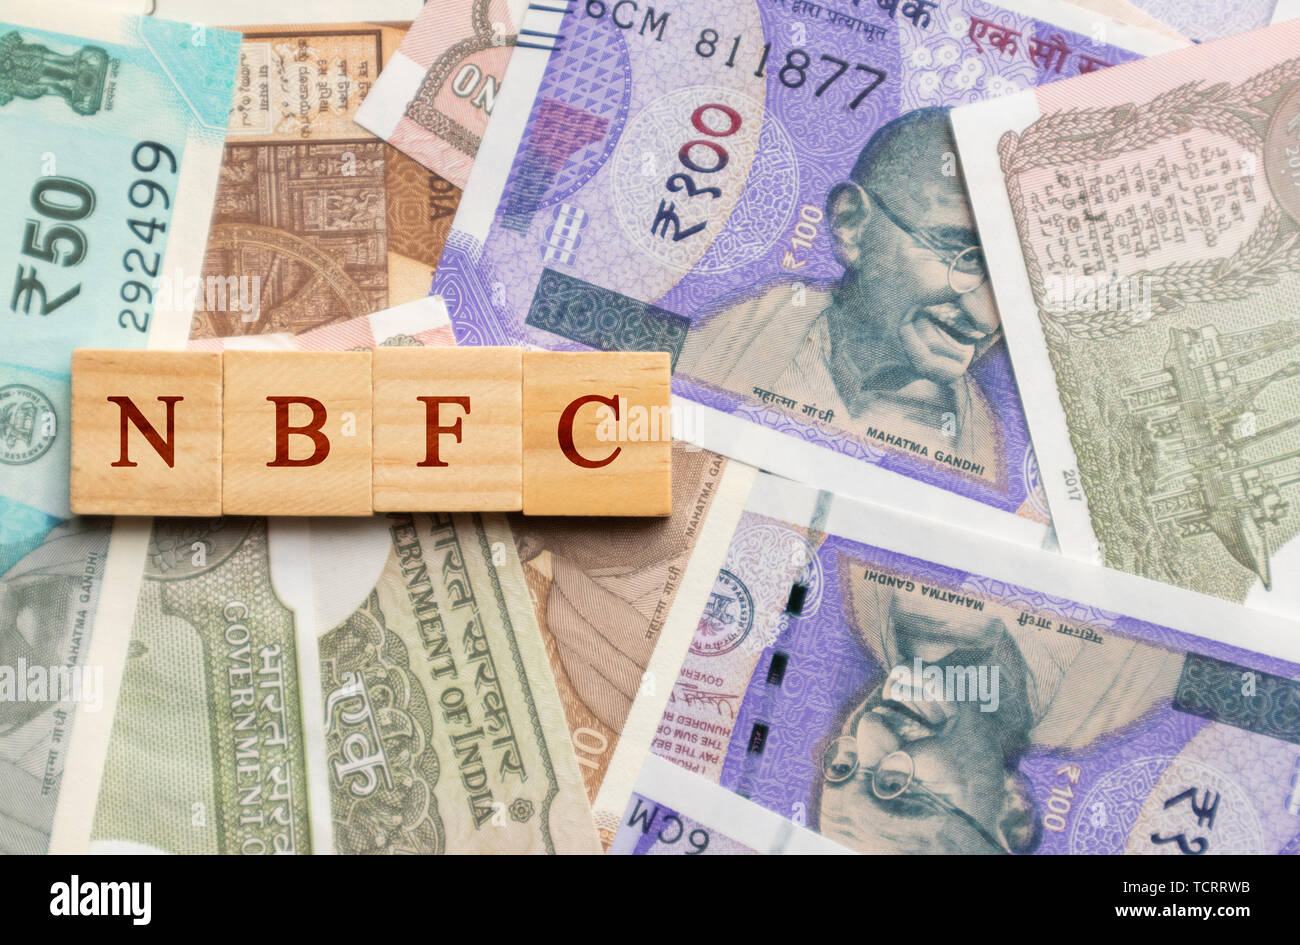 NBFC in wooden block letters on indian currency Stock Photo